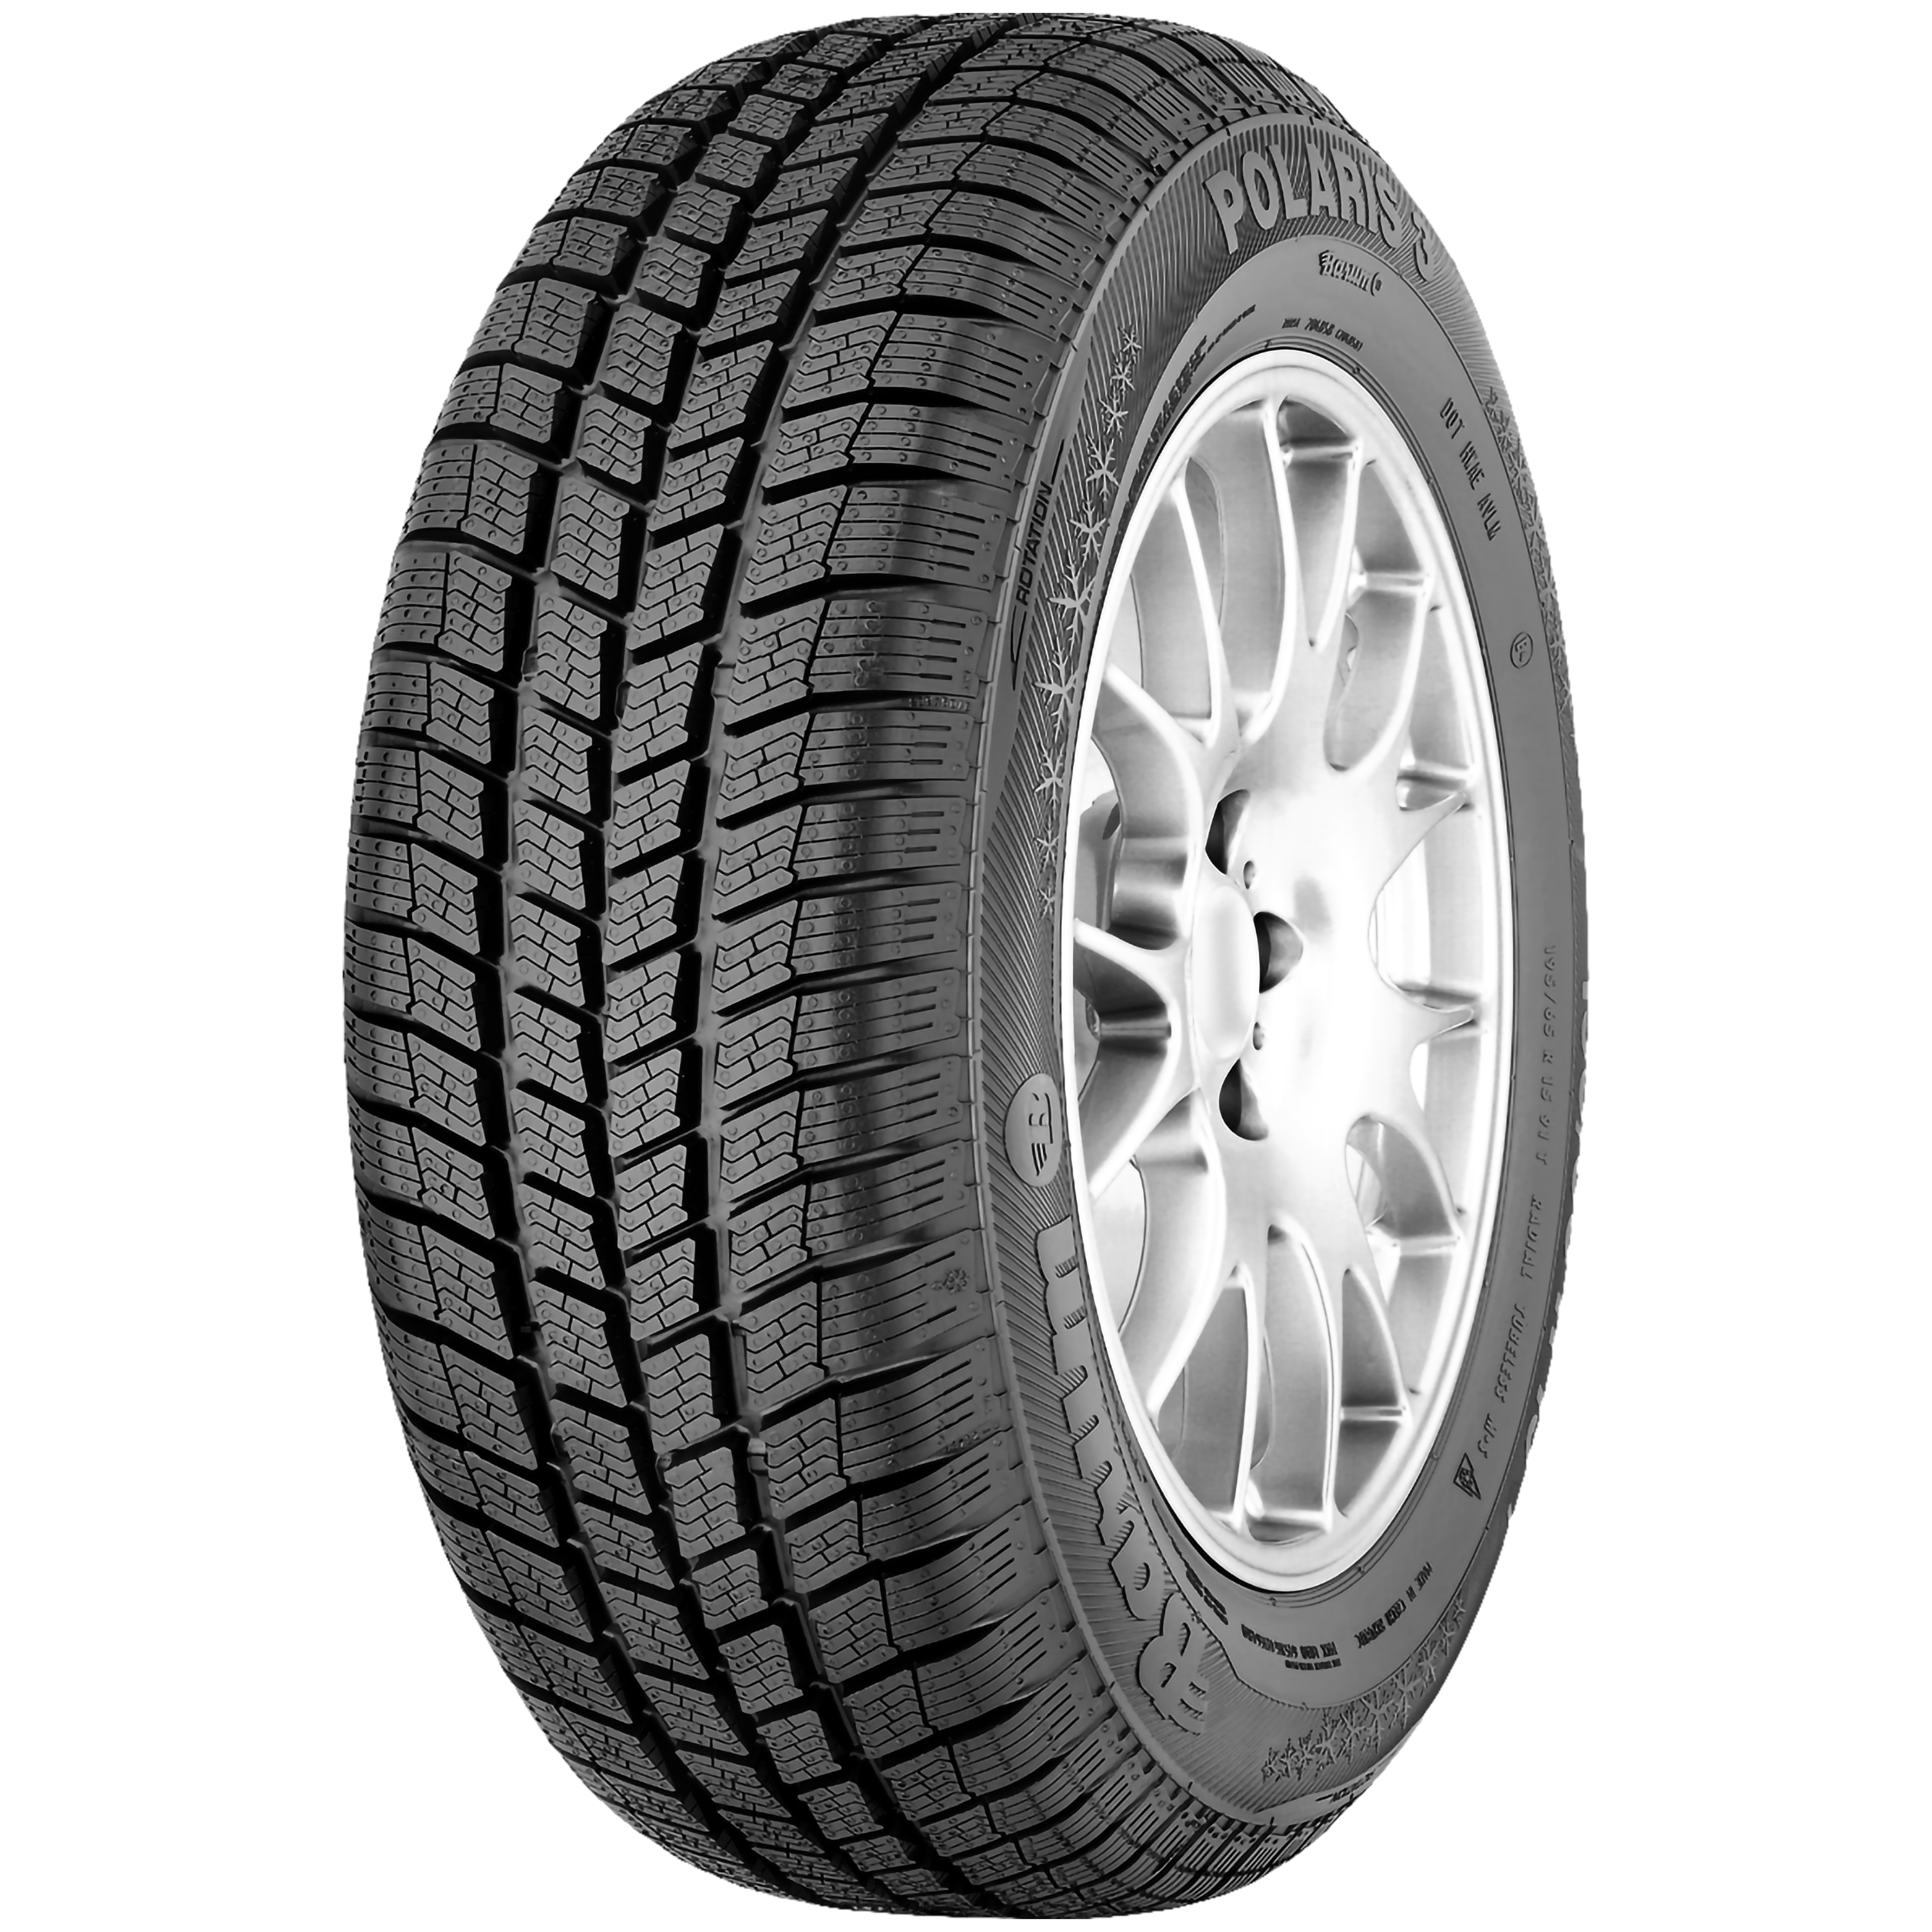 Barum consumption | with low The Polaris fuel Barum winter car resistance & rolling tyre - 3